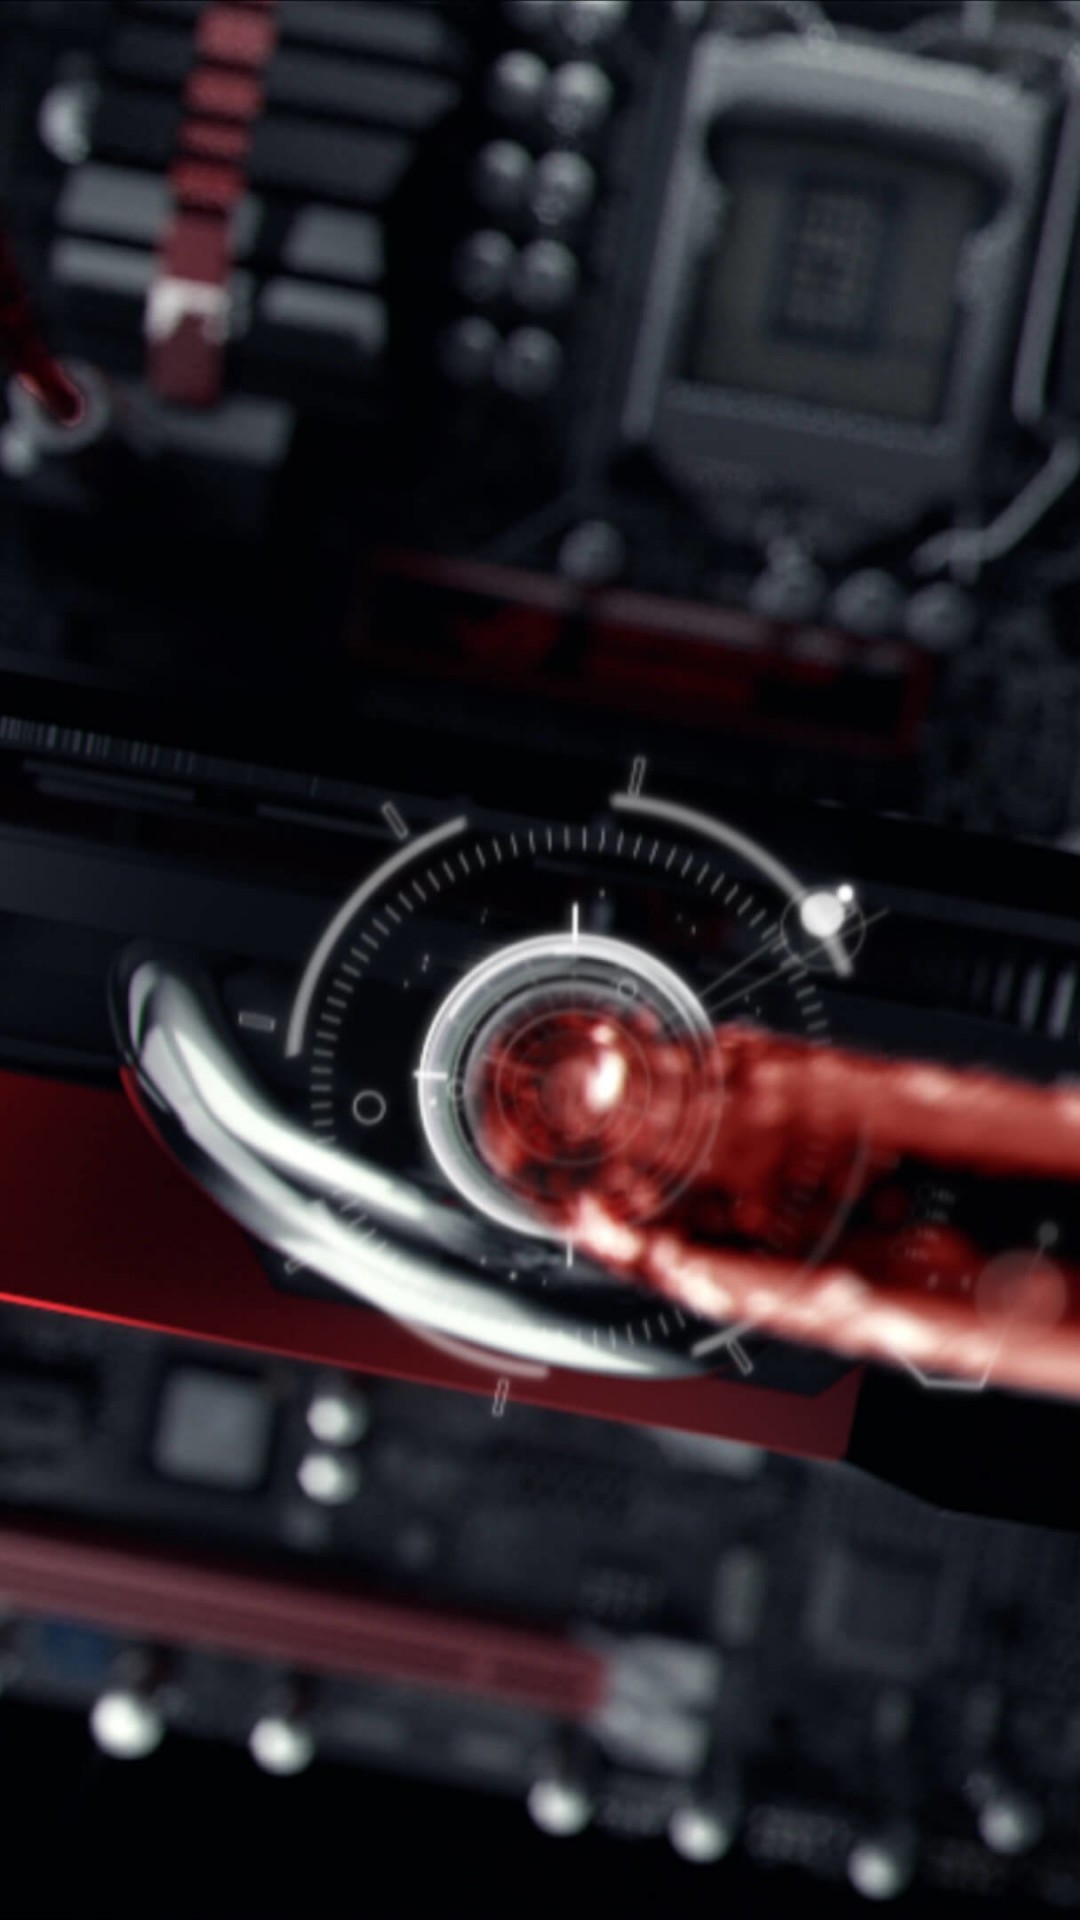 ASUS ROG Poseidon Liquid Cooling Wallpaper for SONY Xperia Z2